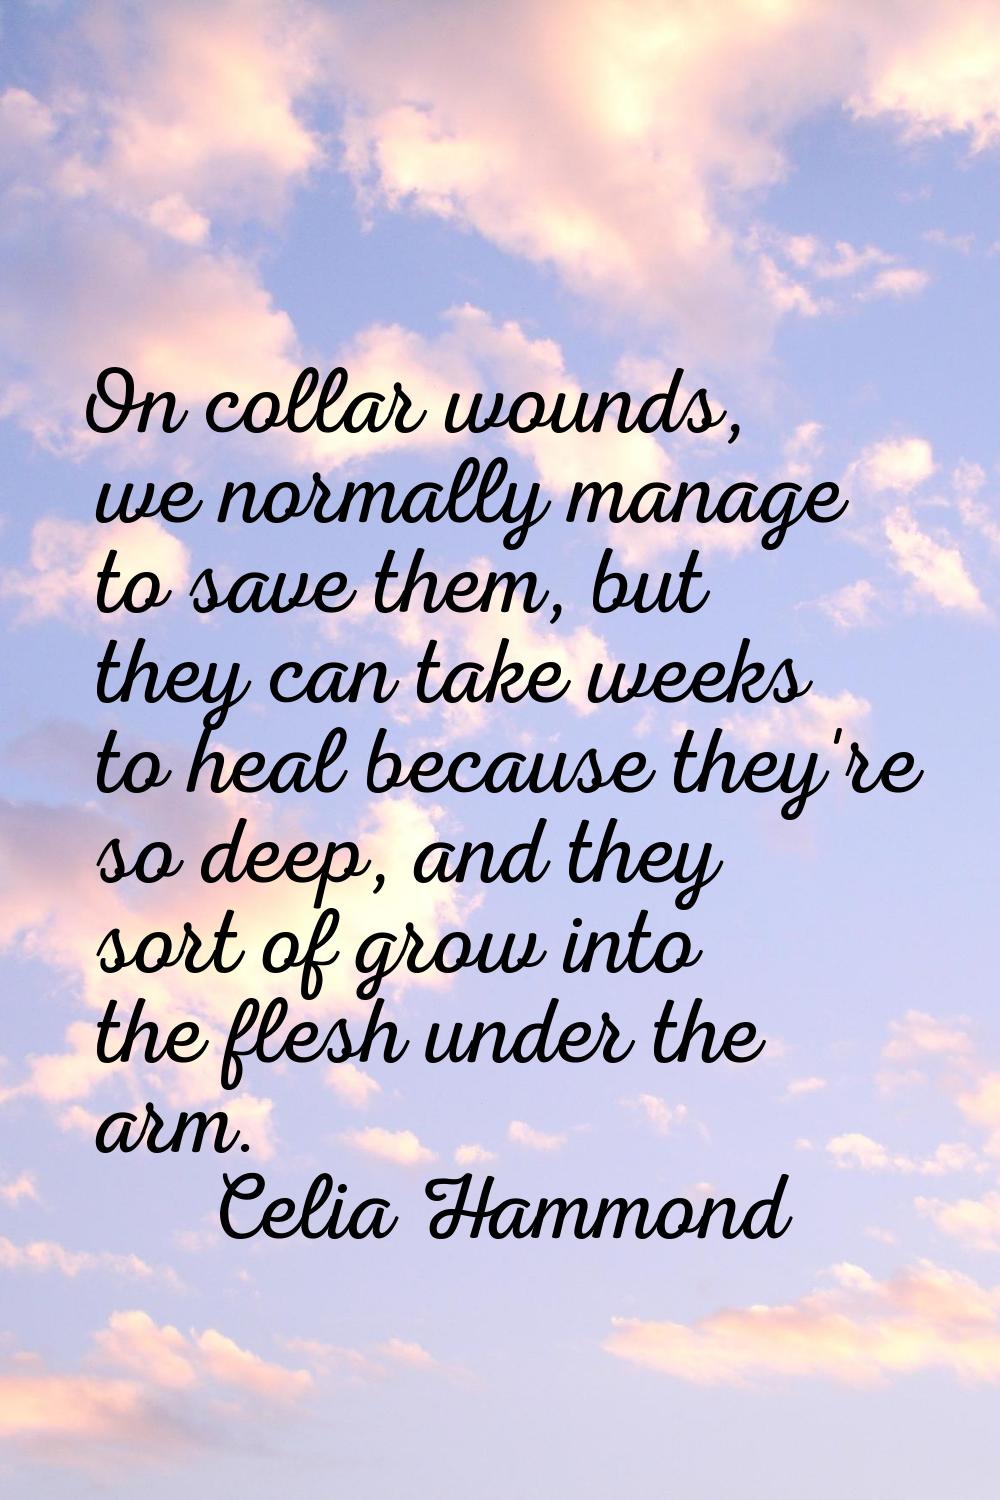 On collar wounds, we normally manage to save them, but they can take weeks to heal because they're 